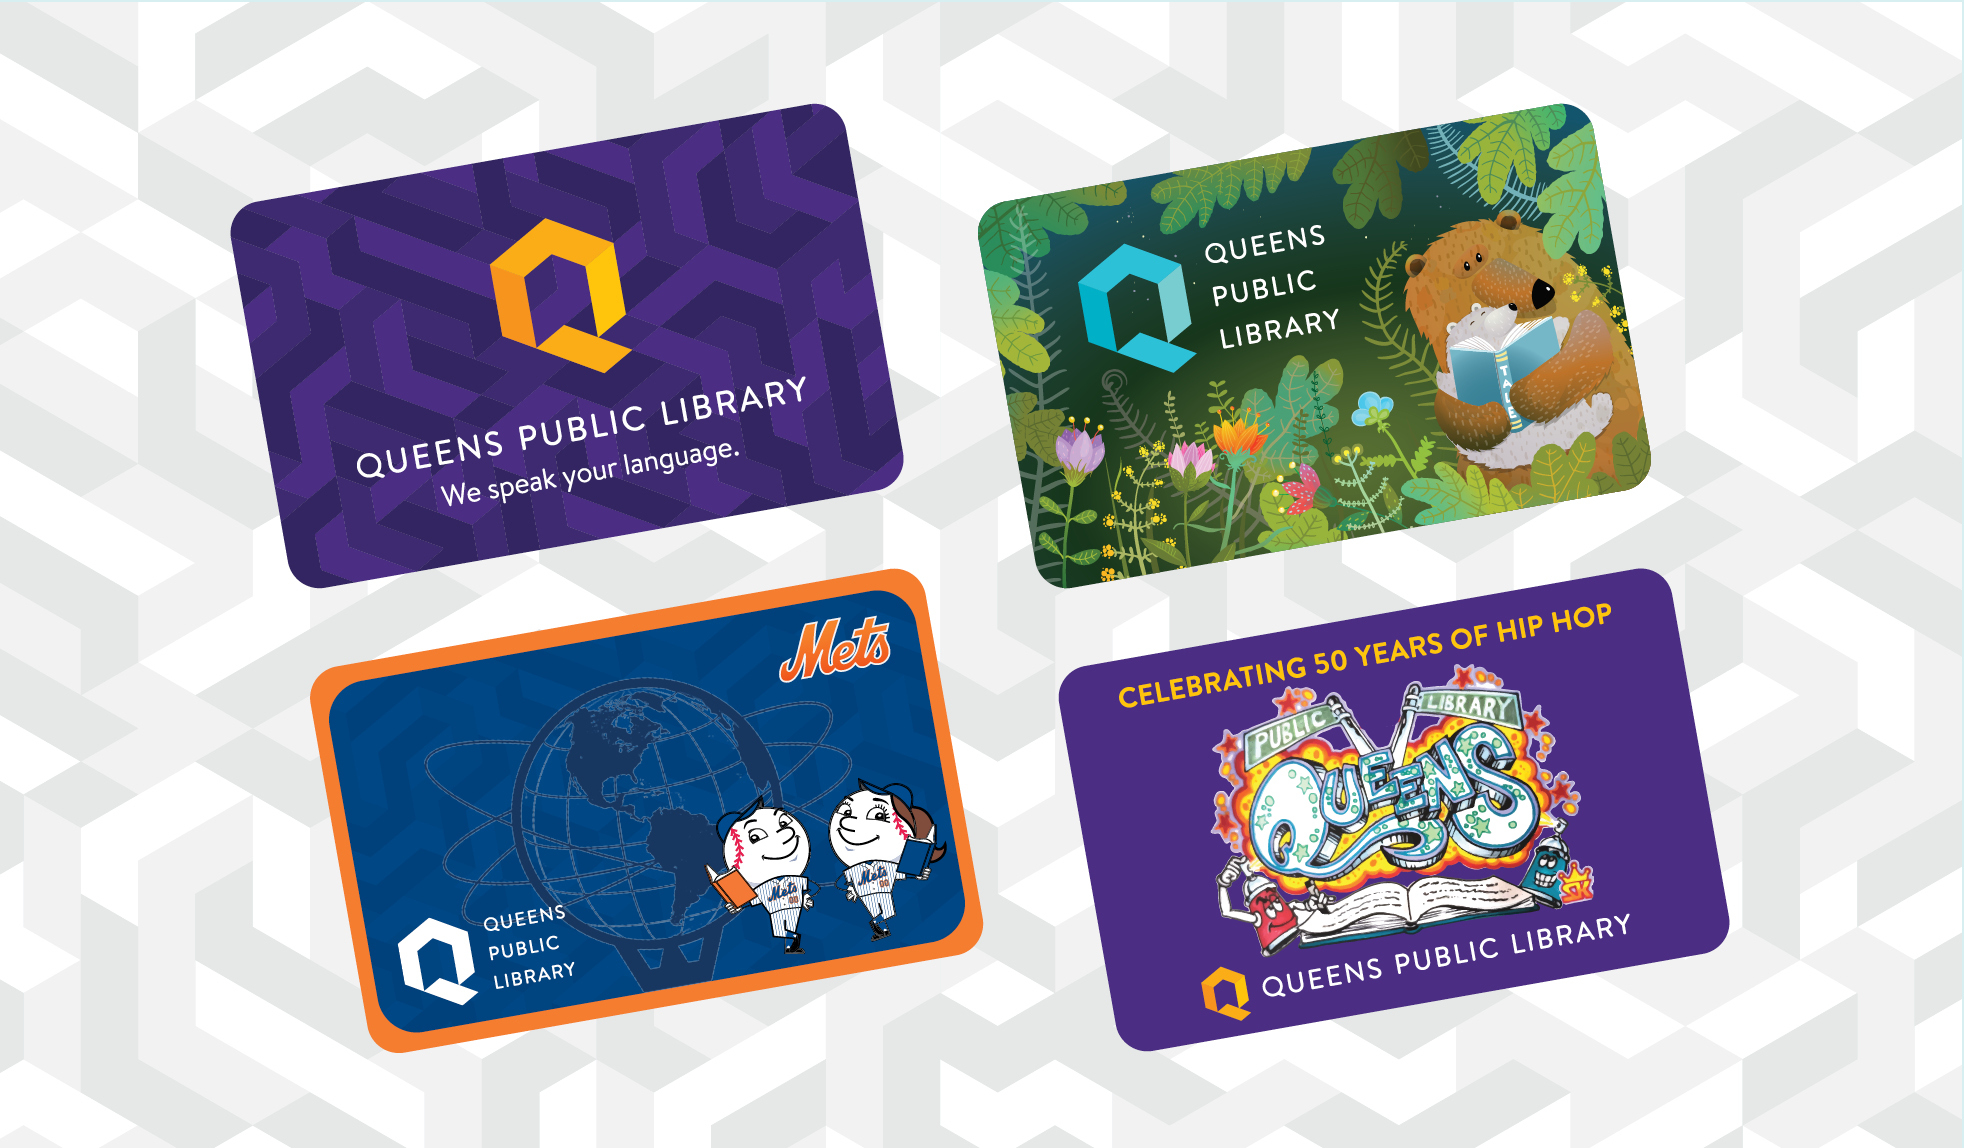 A QPL card is your passport to books, movies, classes, computers, digital devices and so much more!